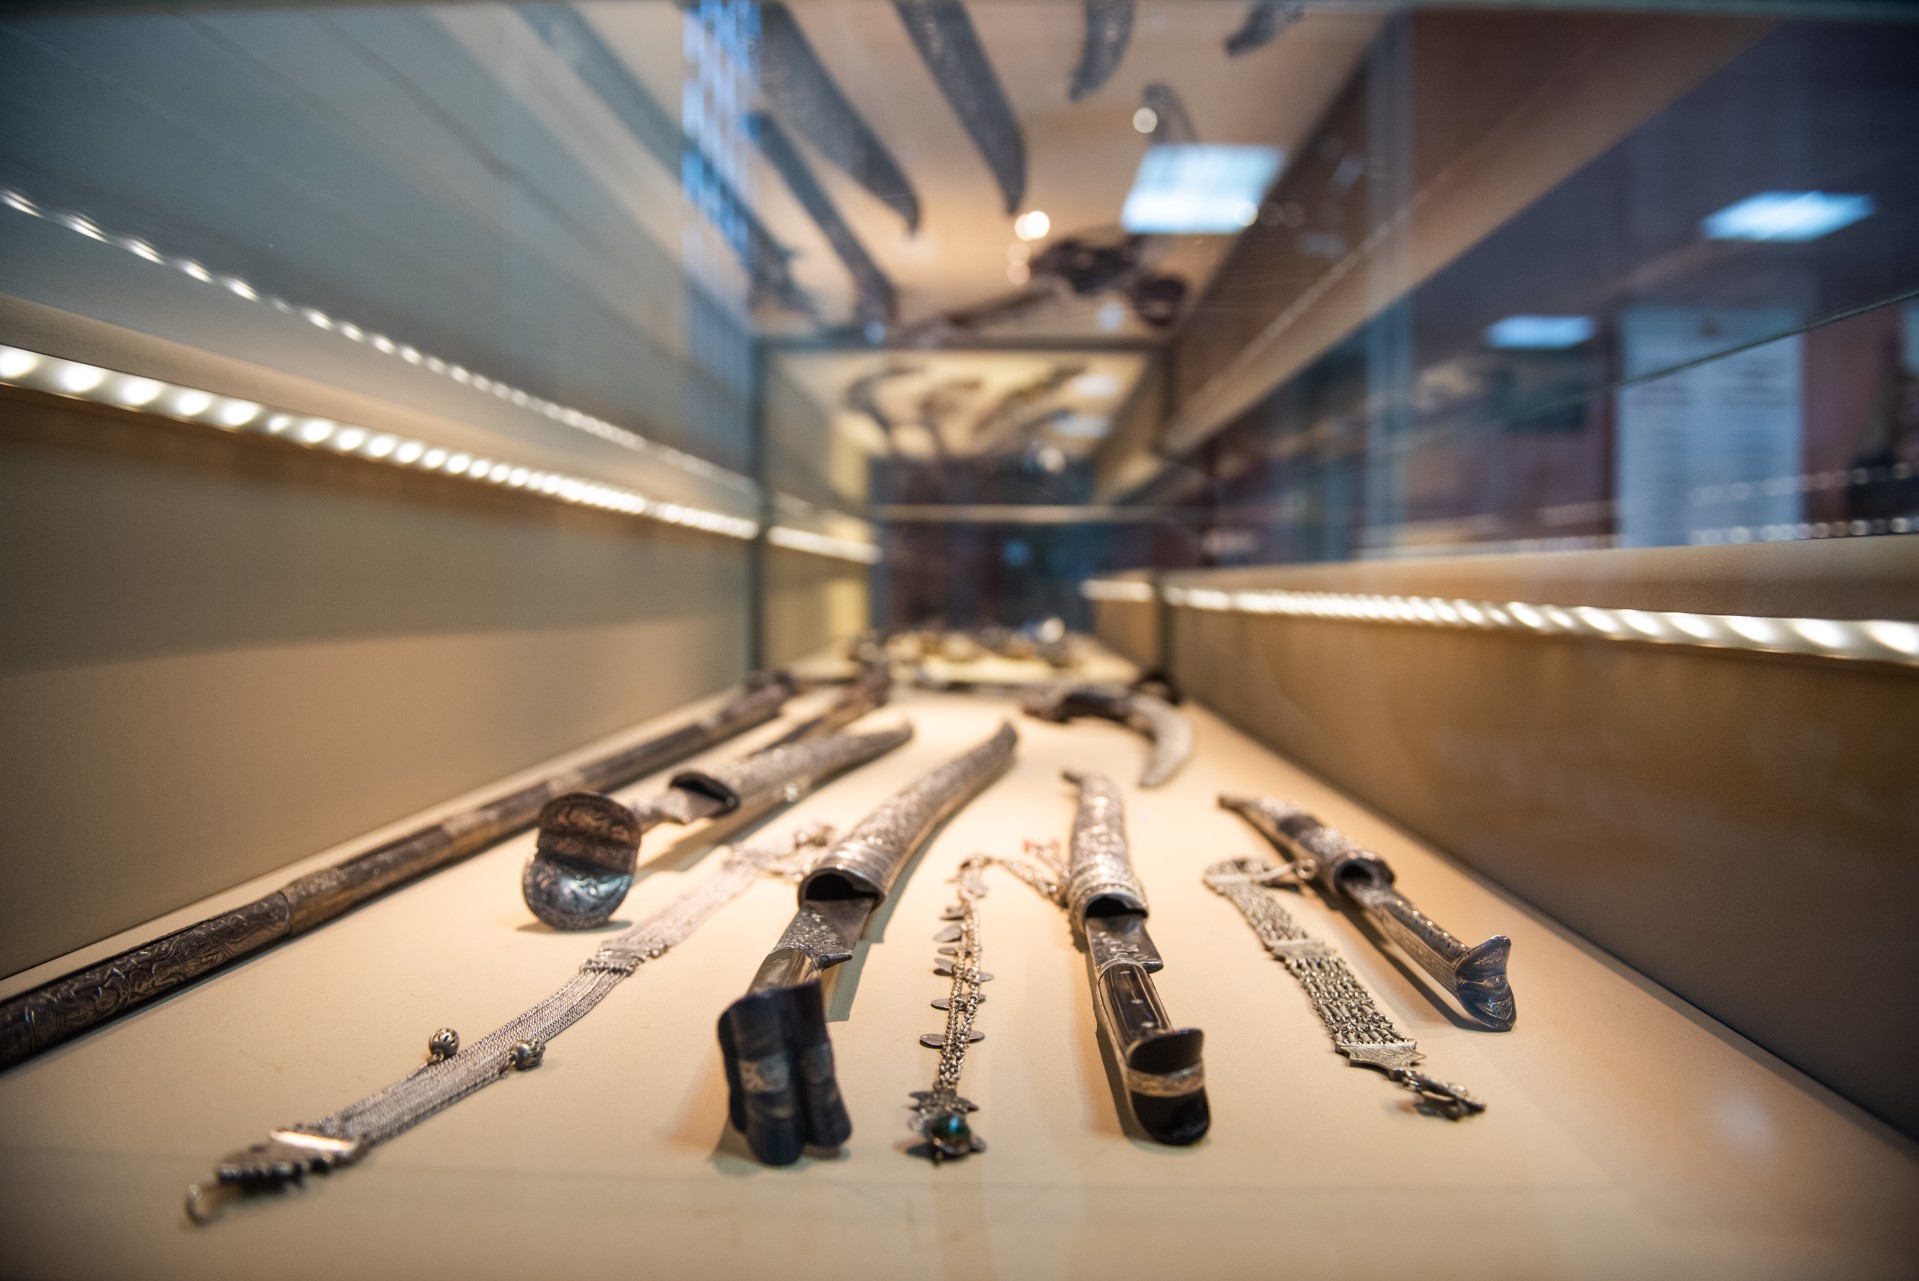 The “polyphonic” tradition of the 19th century: Jewels and weapons from the collections of Andy Antotsiou and Antonis Souliotis